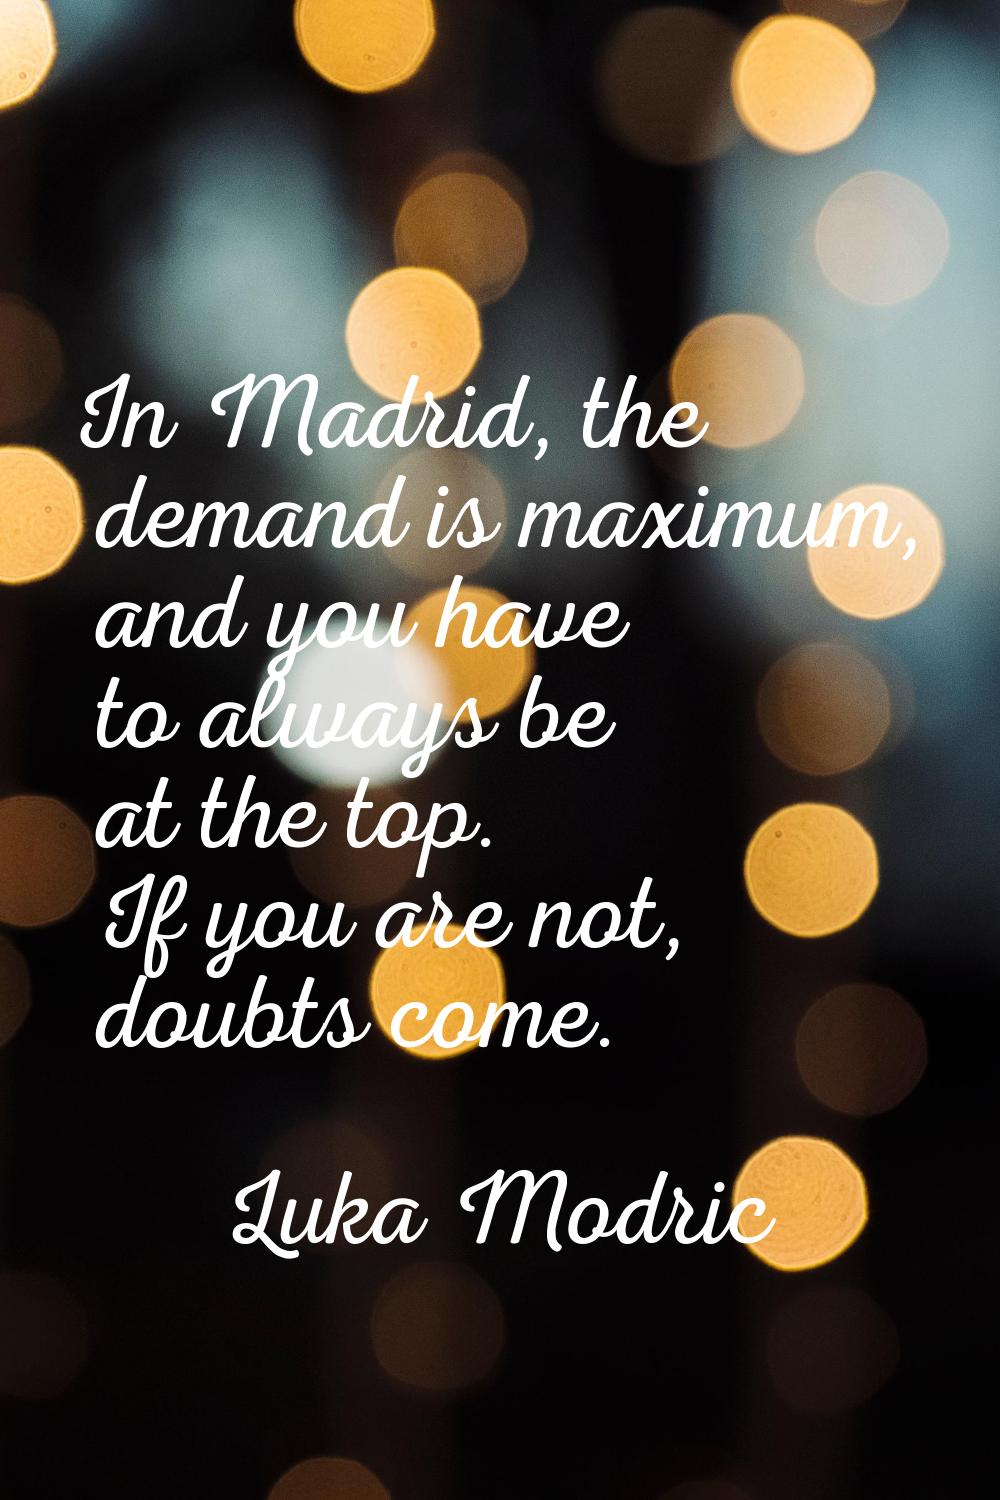 In Madrid, the demand is maximum, and you have to always be at the top. If you are not, doubts come